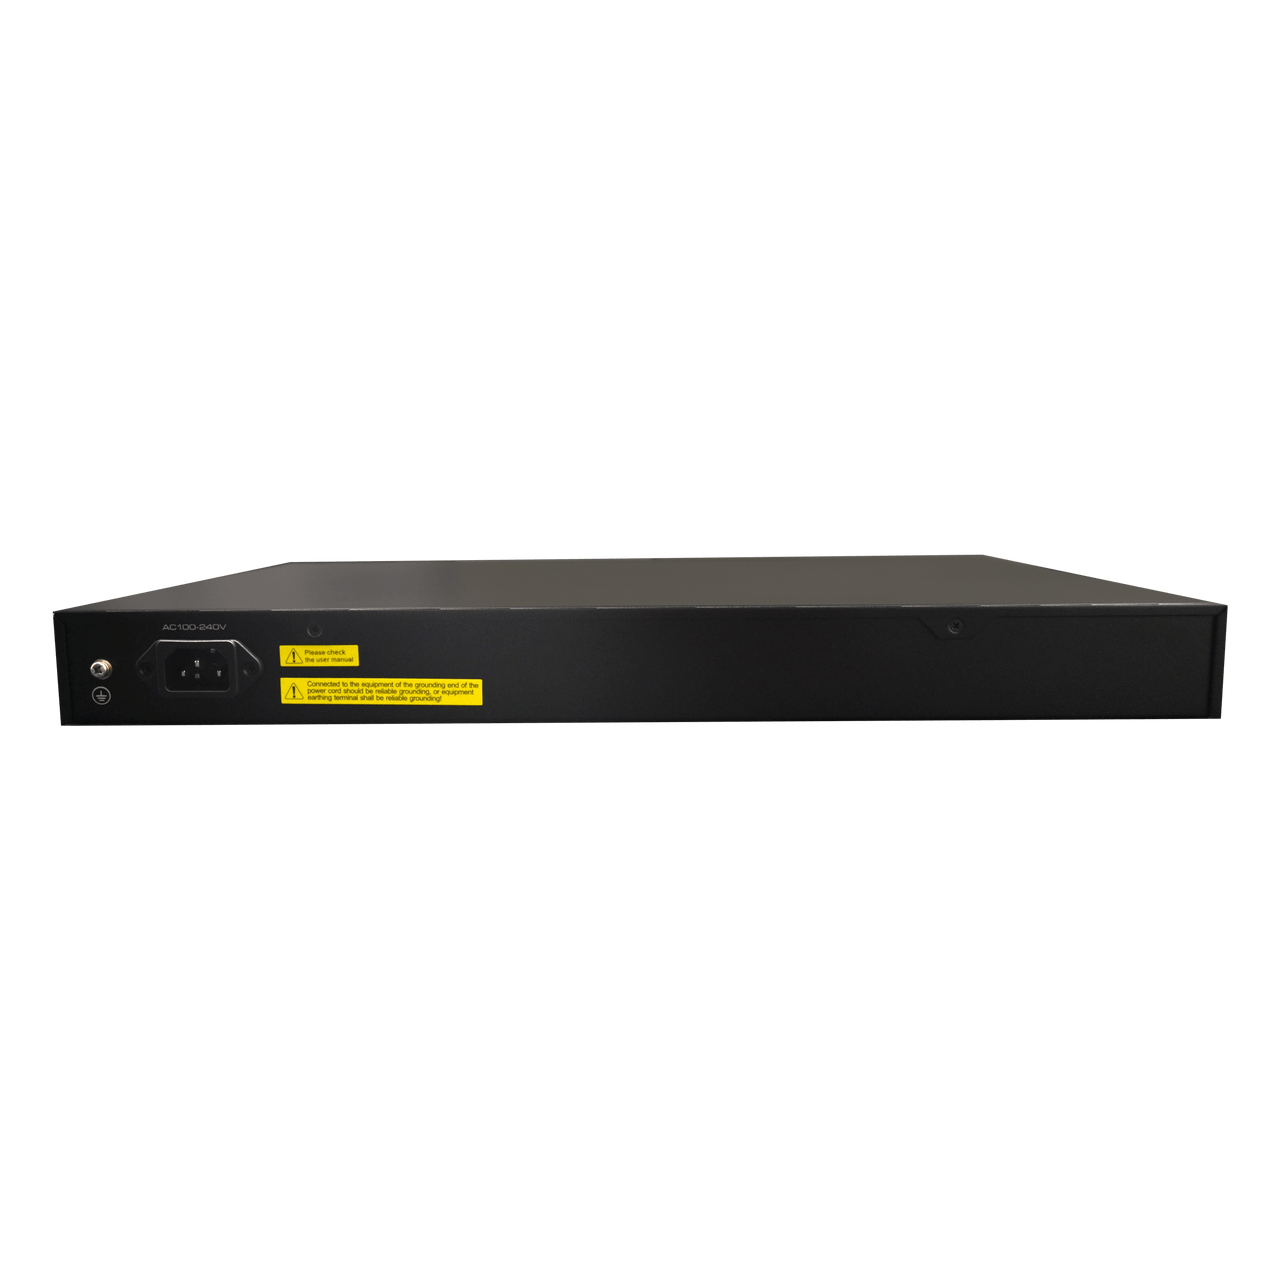 Speco Technologies P16S18 18 Port Switch with 16 port PoE 802.3at, 180W total power budget (P16S18)